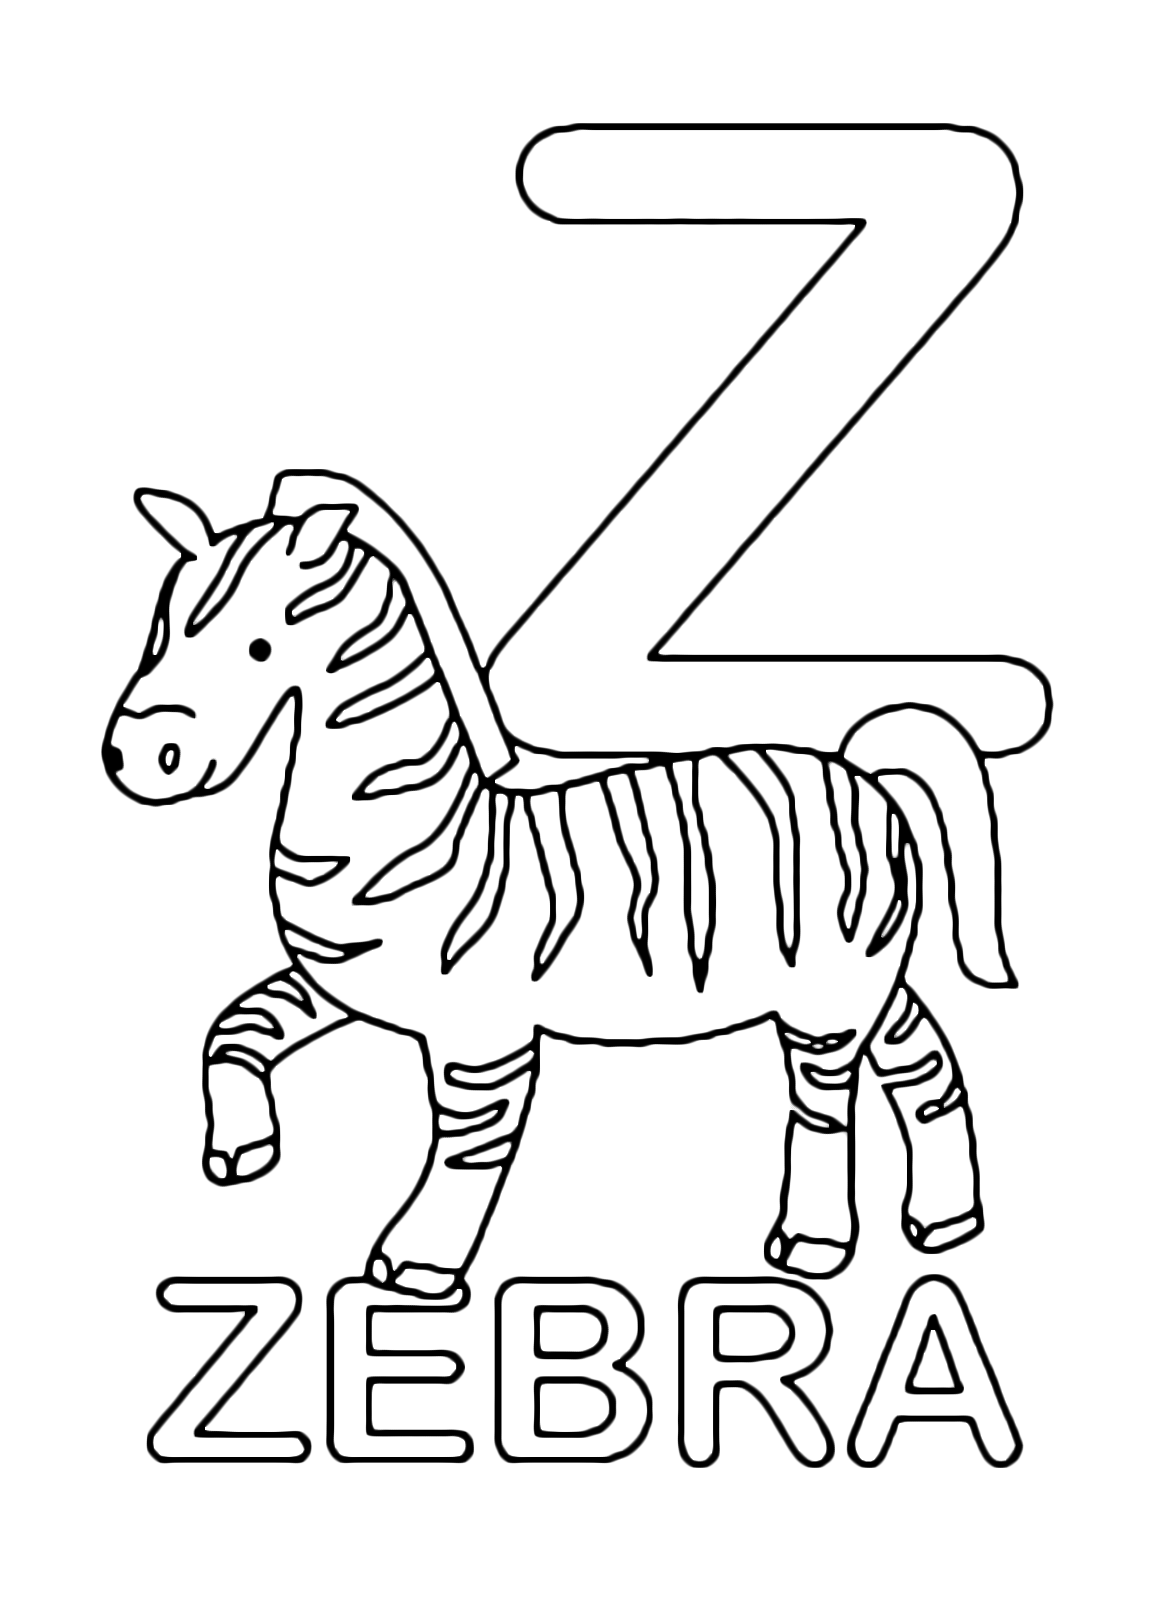 Letters and numbers - Z for zebra uppercase letter